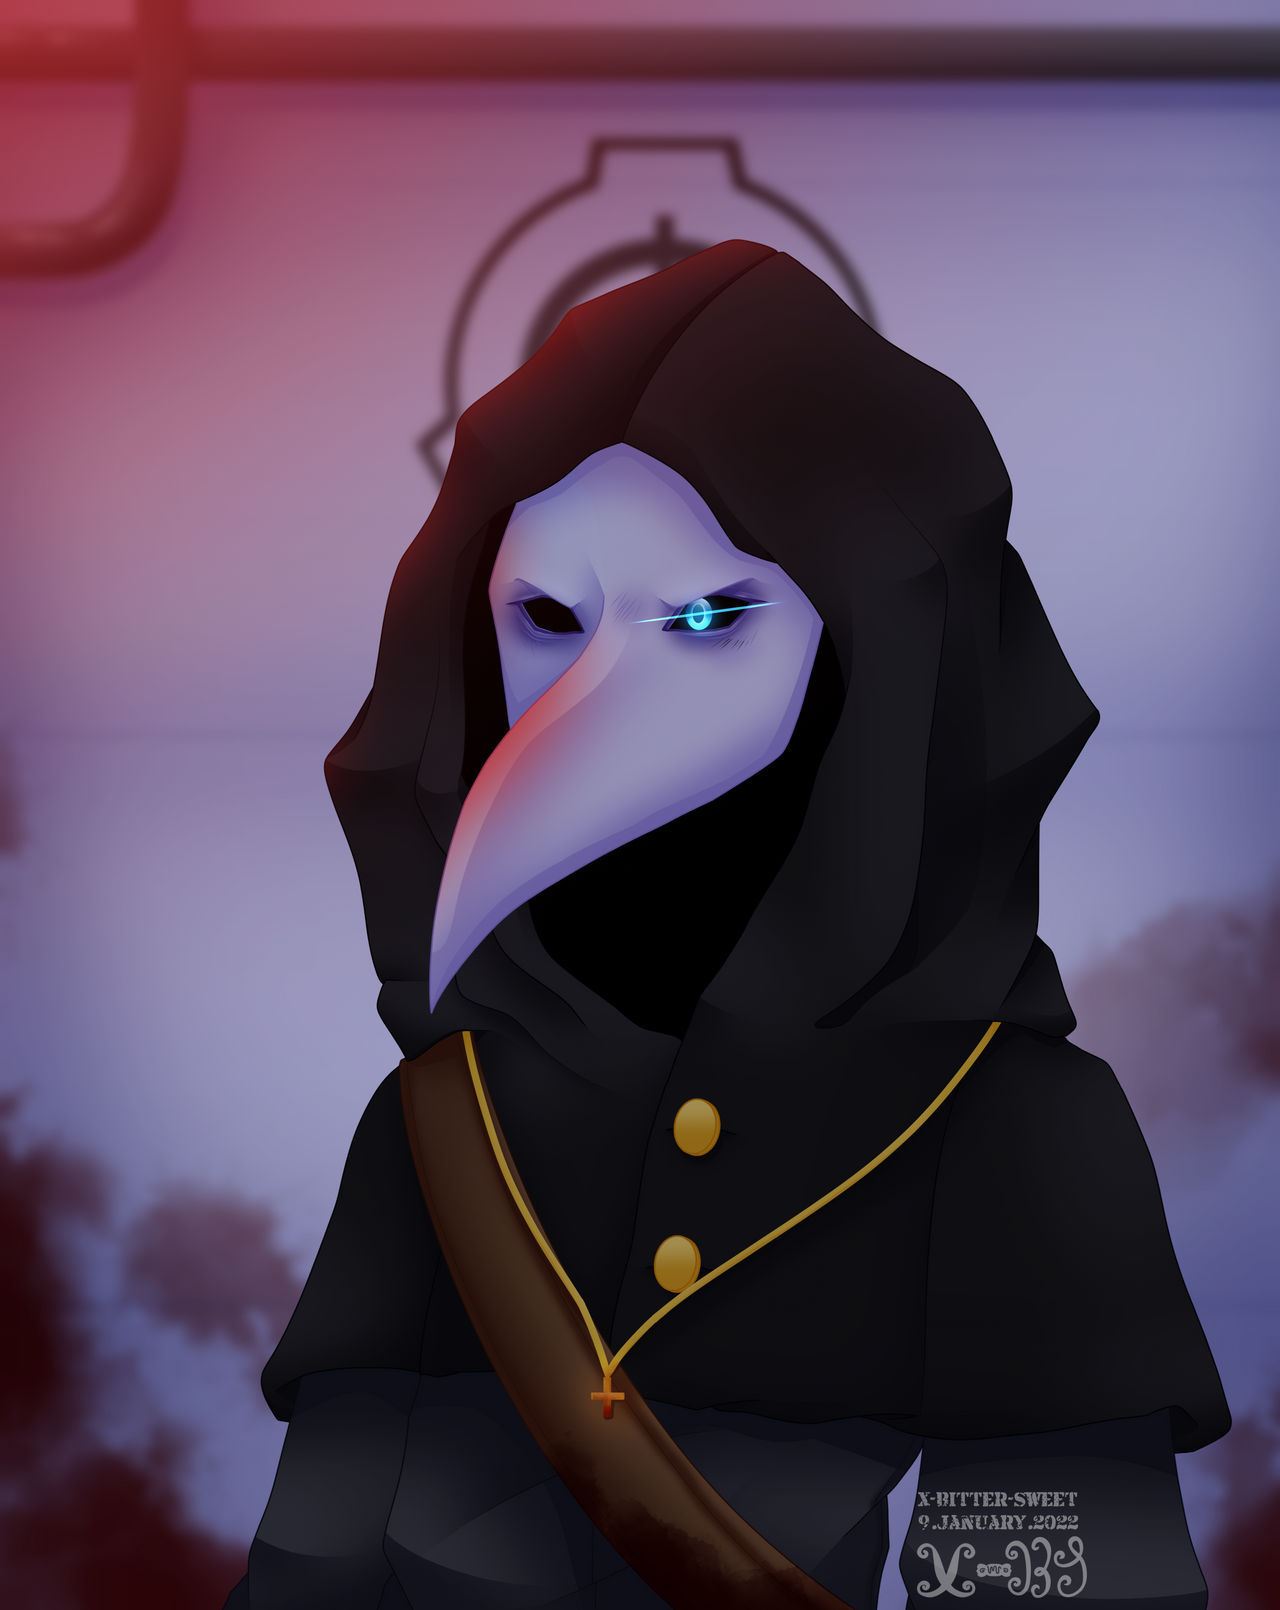 crying_anabell on X: RT @Malebeja1: The Plague Doctor, SCP-049 #SCP  #SCPFoundation #scpfanart #scpart #scp049 #plaguedoctor   / X